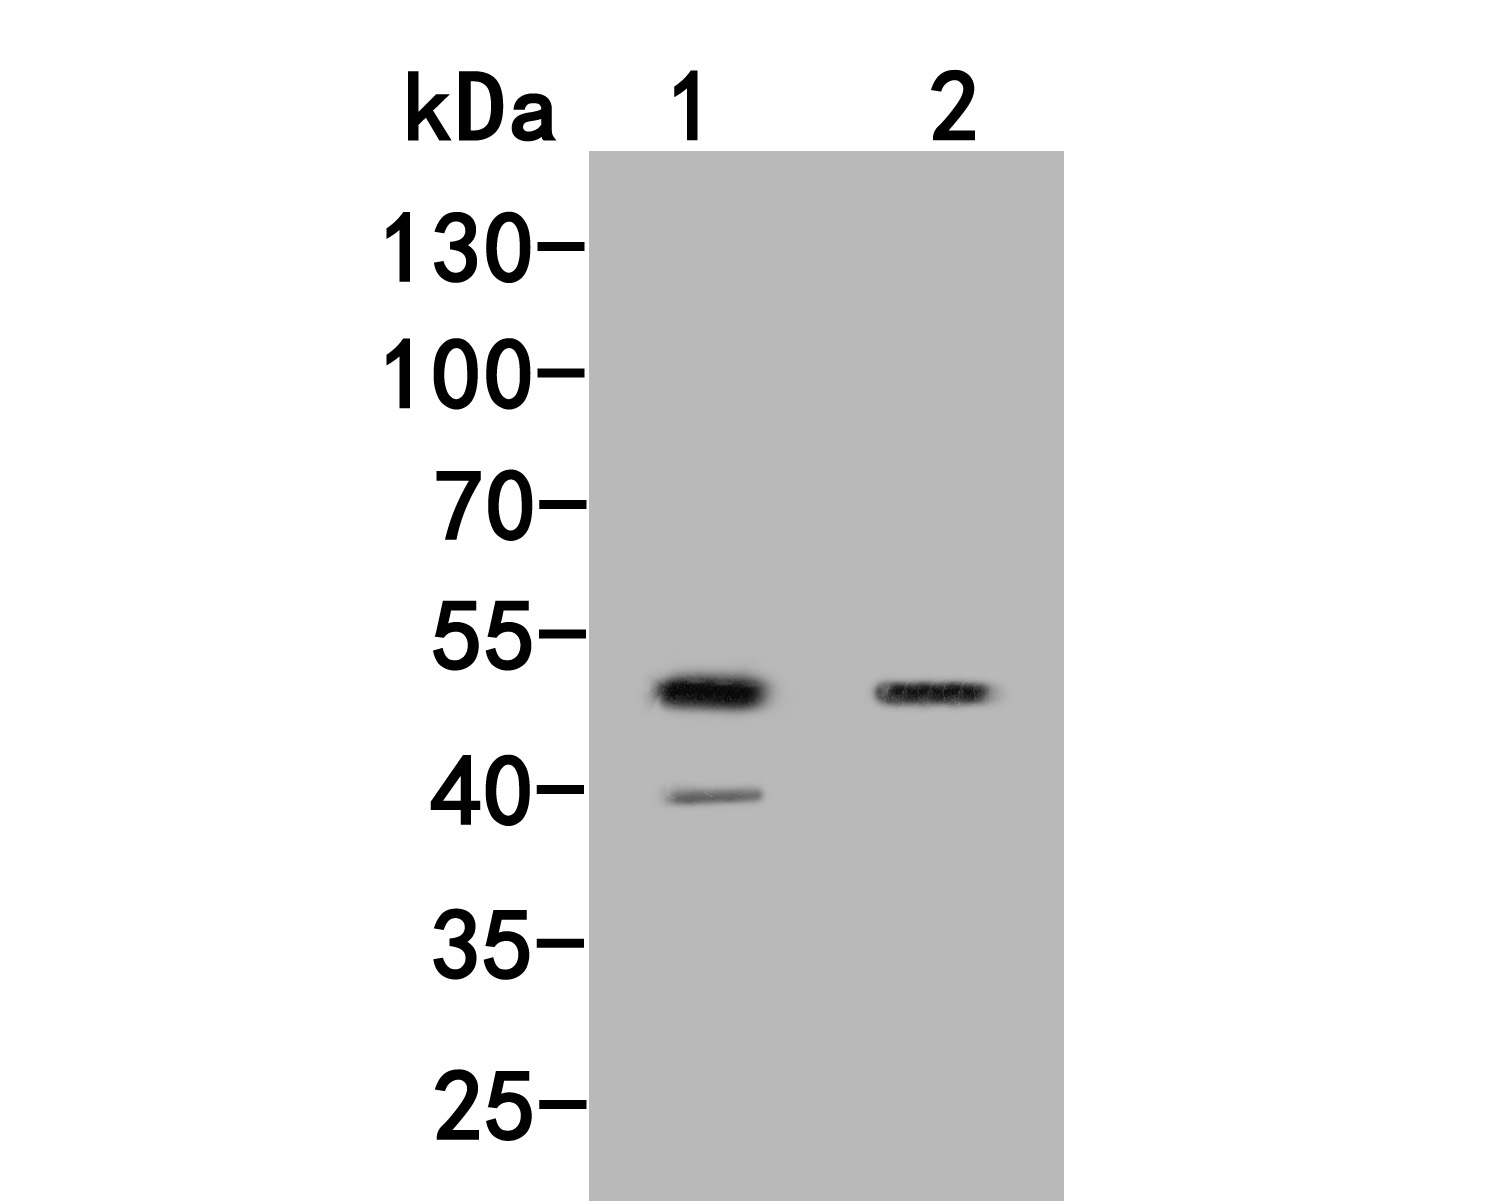 Western blot analysis of UAP56 on different lysates. Proteins were transferred to a PVDF membrane and blocked with 5% BSA in PBS for 1 hour at room temperature. The primary antibody (HA500102, 1/500) was used in 5% BSA at room temperature for 2 hours. Goat Anti-Rabbit IgG - HRP Secondary Antibody (HA1001) at 1:5,000 dilution was used for 1 hour at room temperature.<br />
Positive control: <br />
Lane 1: 293 cell lysate<br />
Lane 2: Hela cell lysate